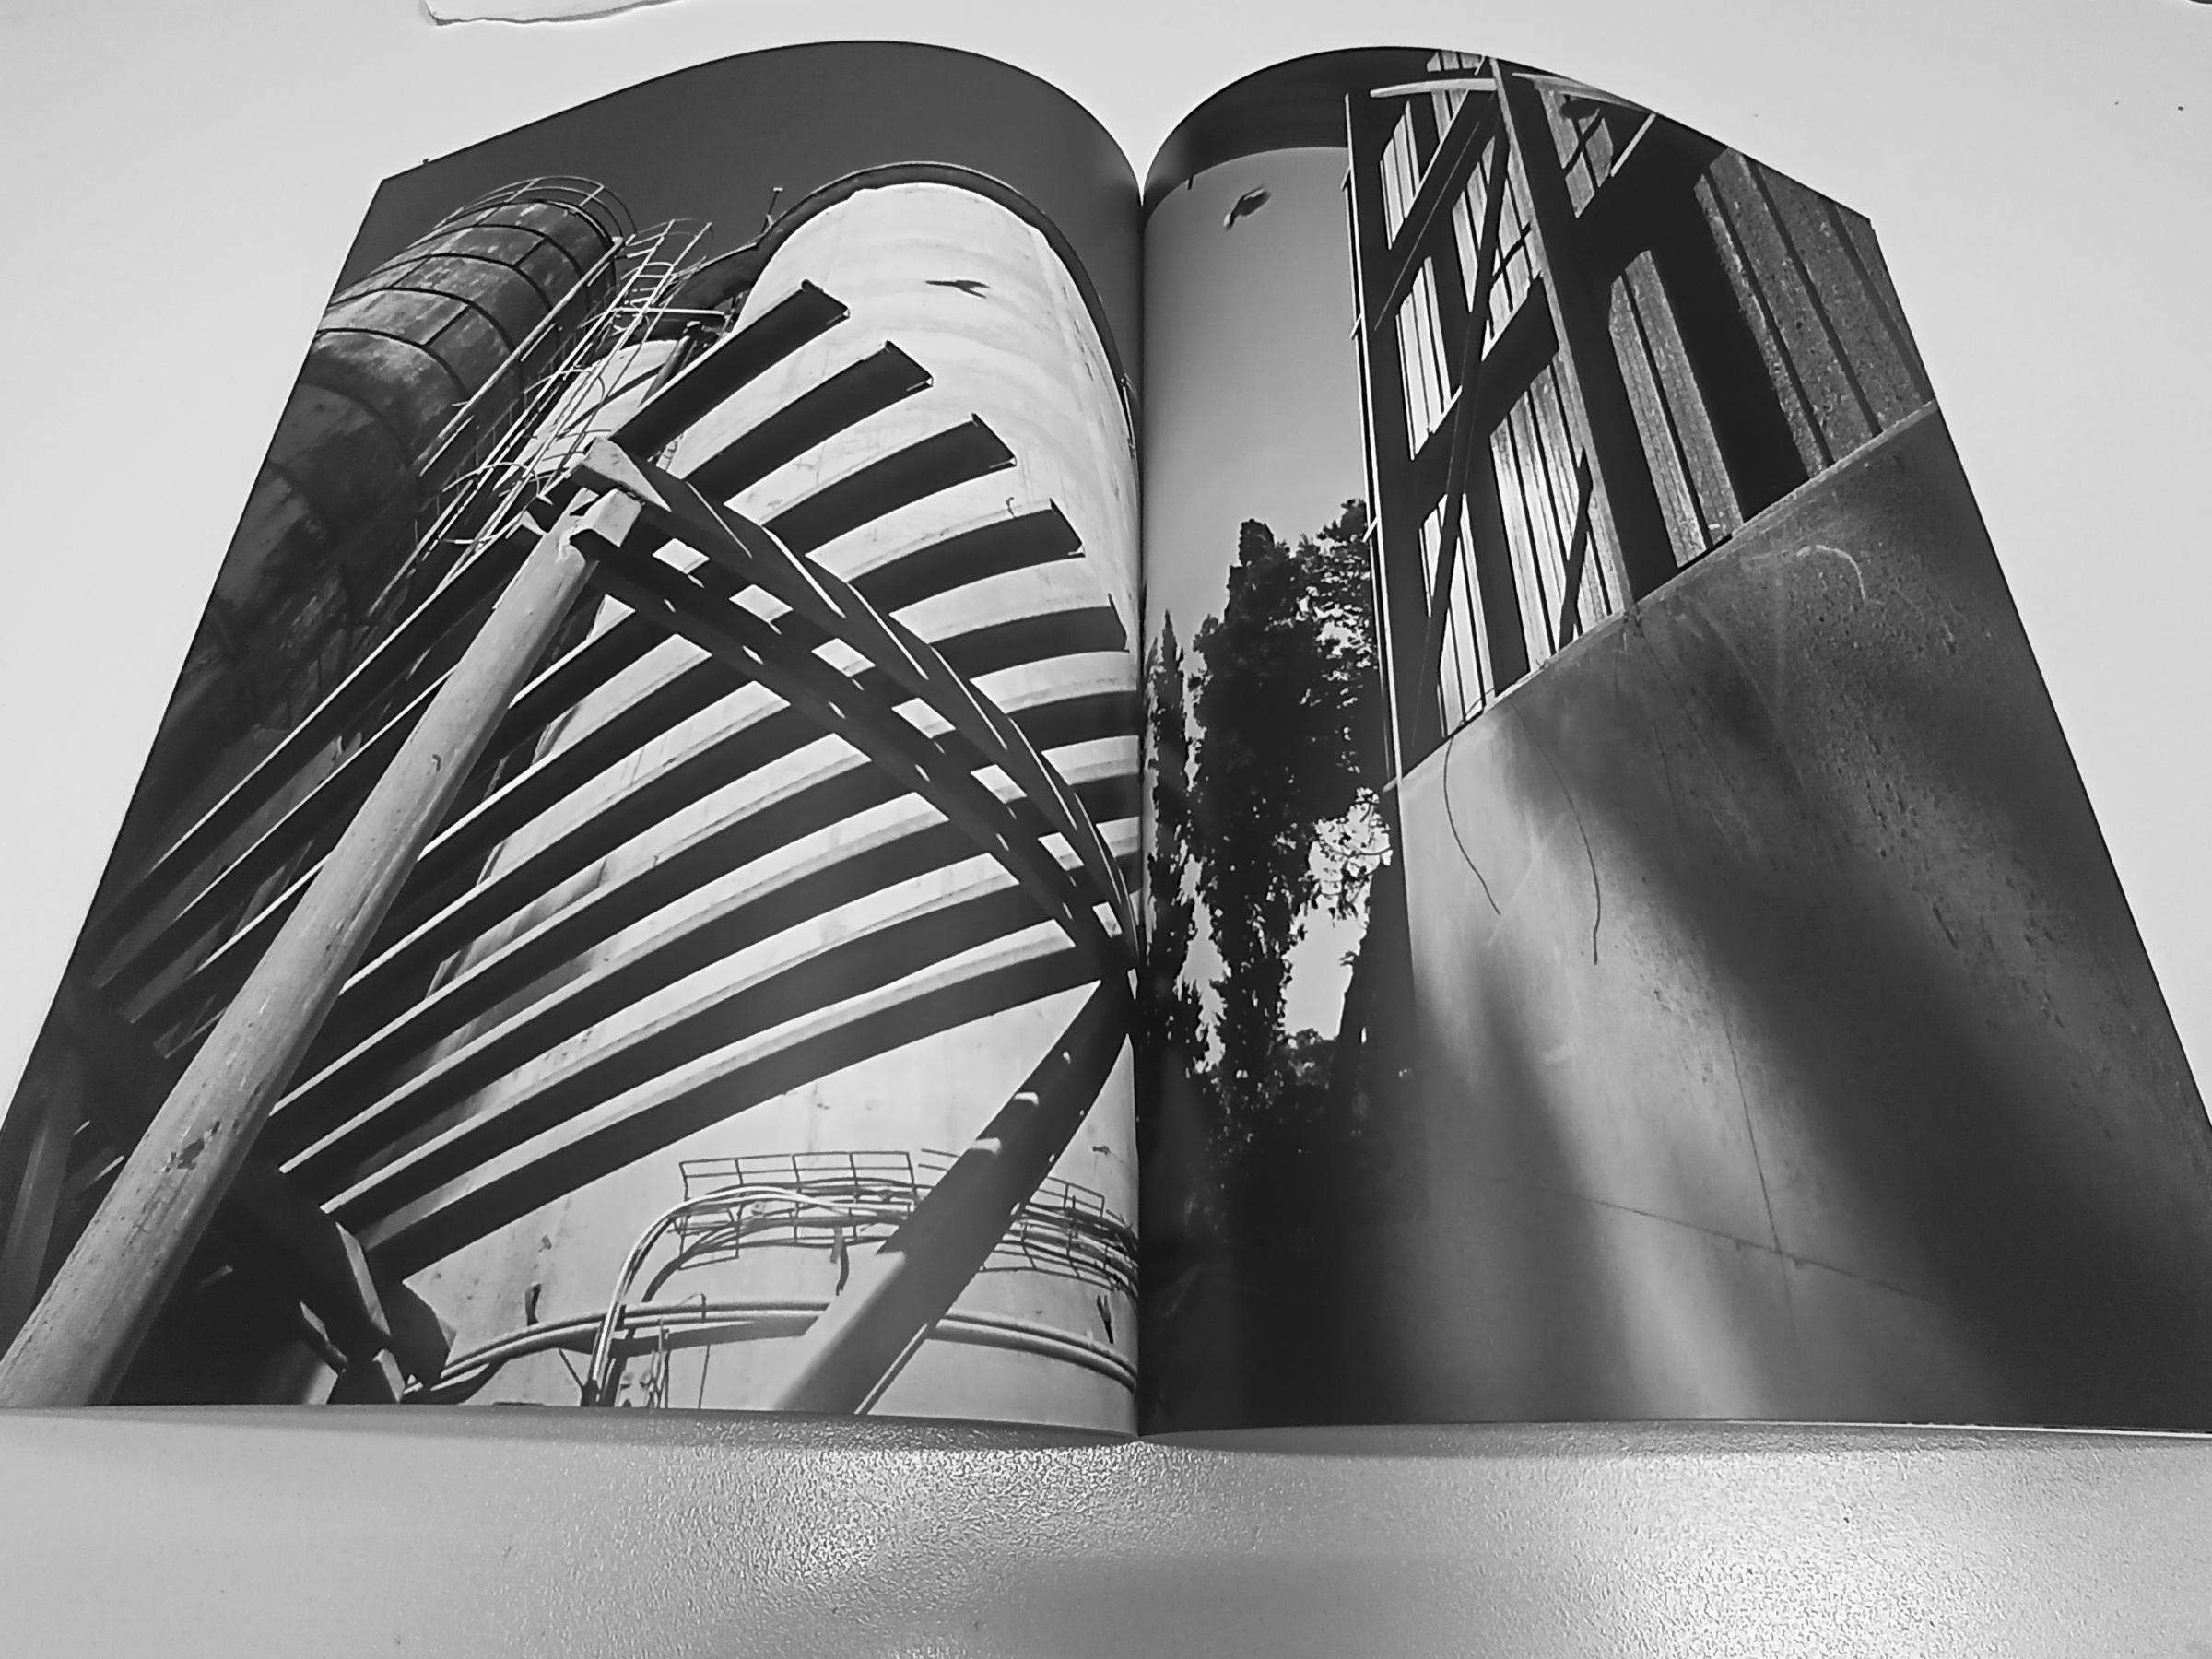 My third self-published photo book (this time a magazine) is available online in my Blurb site books portfolio.